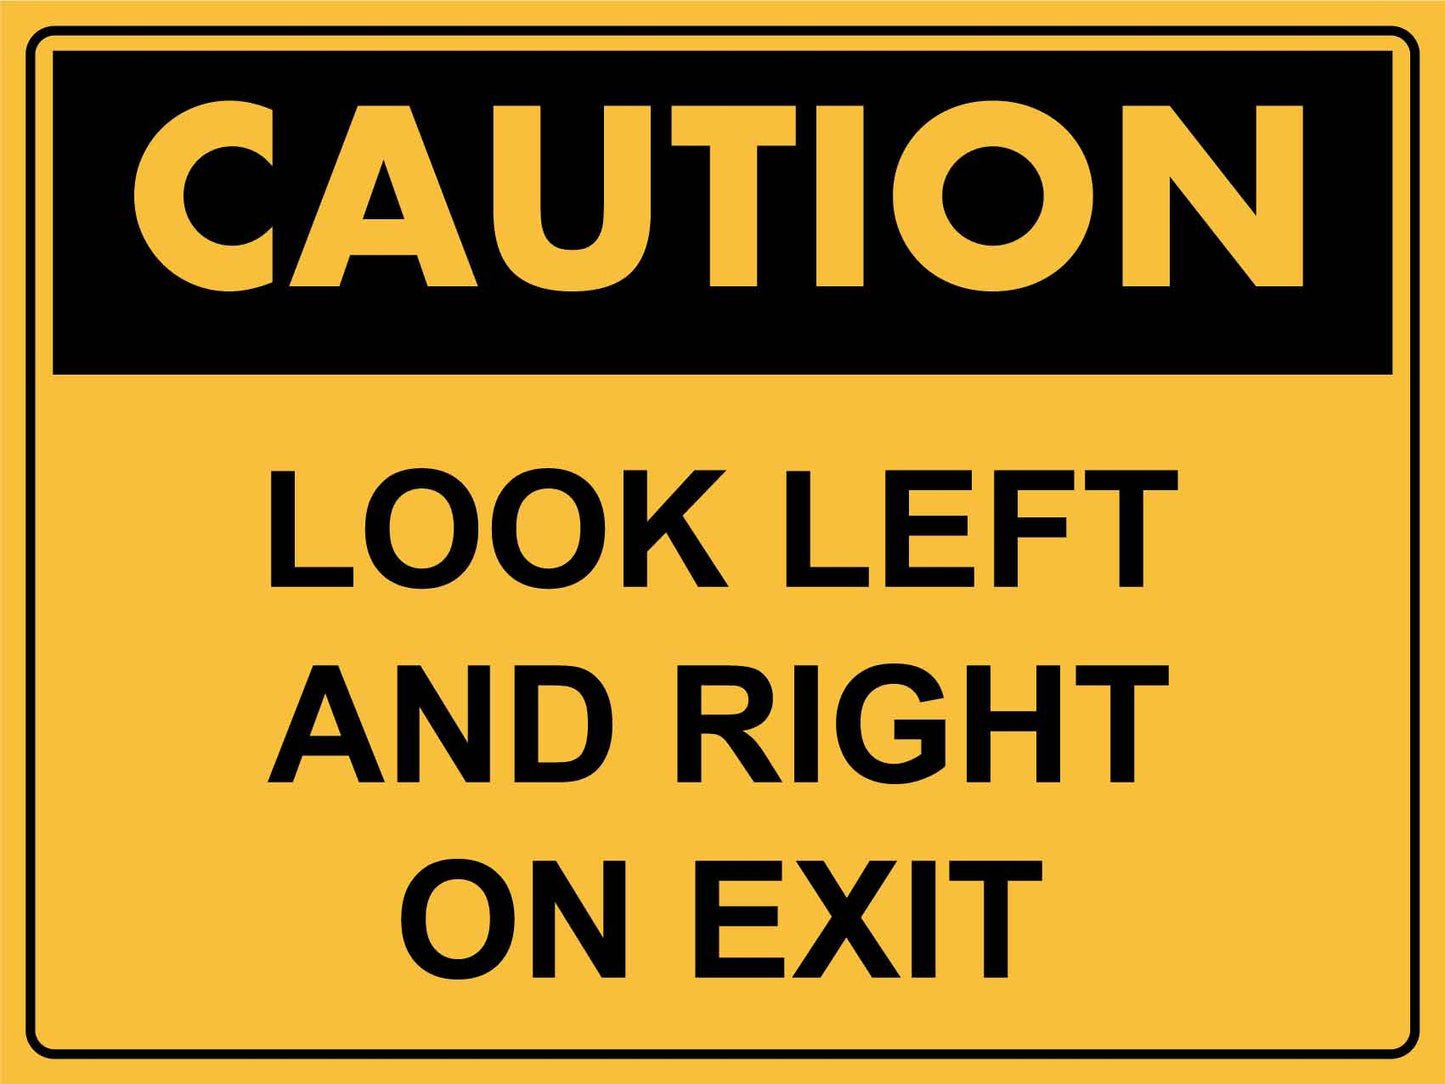 Caution Look Left and Right on Exit Sign